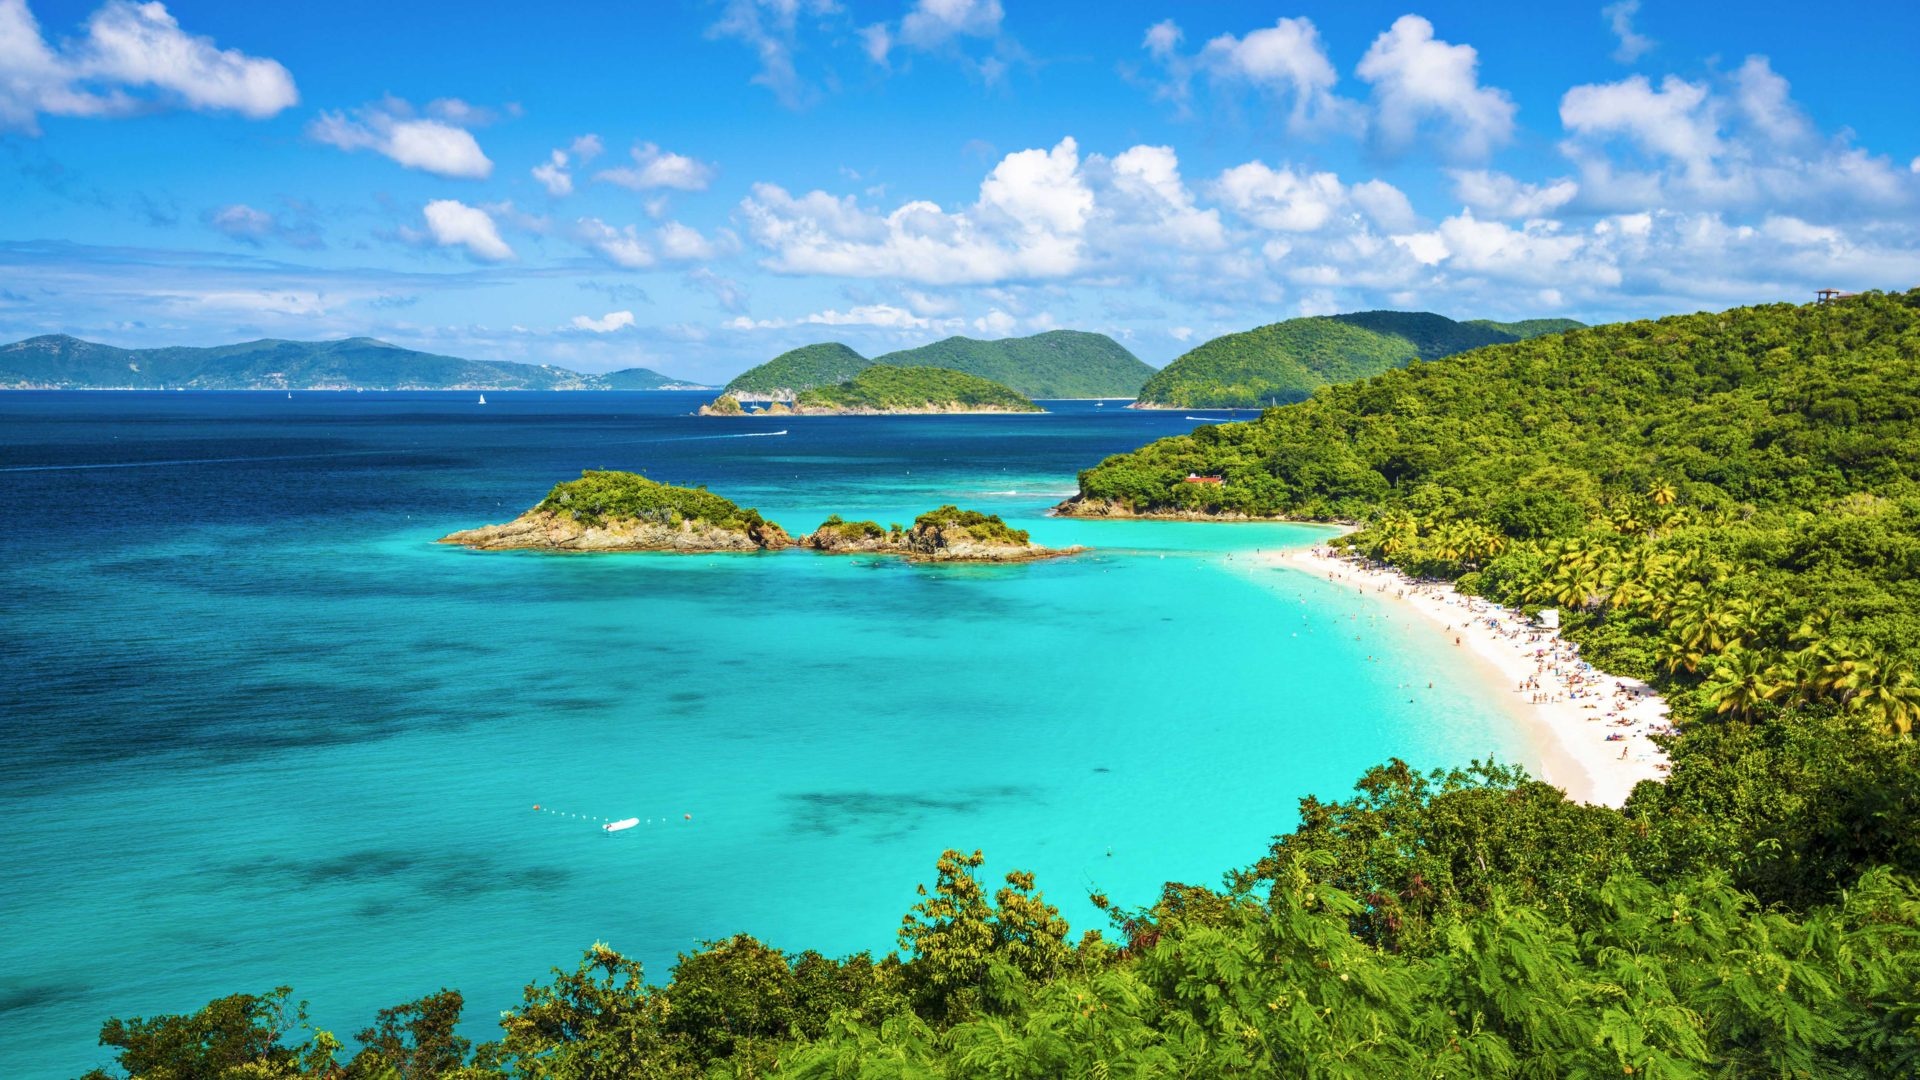 Caribbean Islands: Trunk Bay, a body of water and a beach on St. John, Natural landscape. 1920x1080 Full HD Wallpaper.